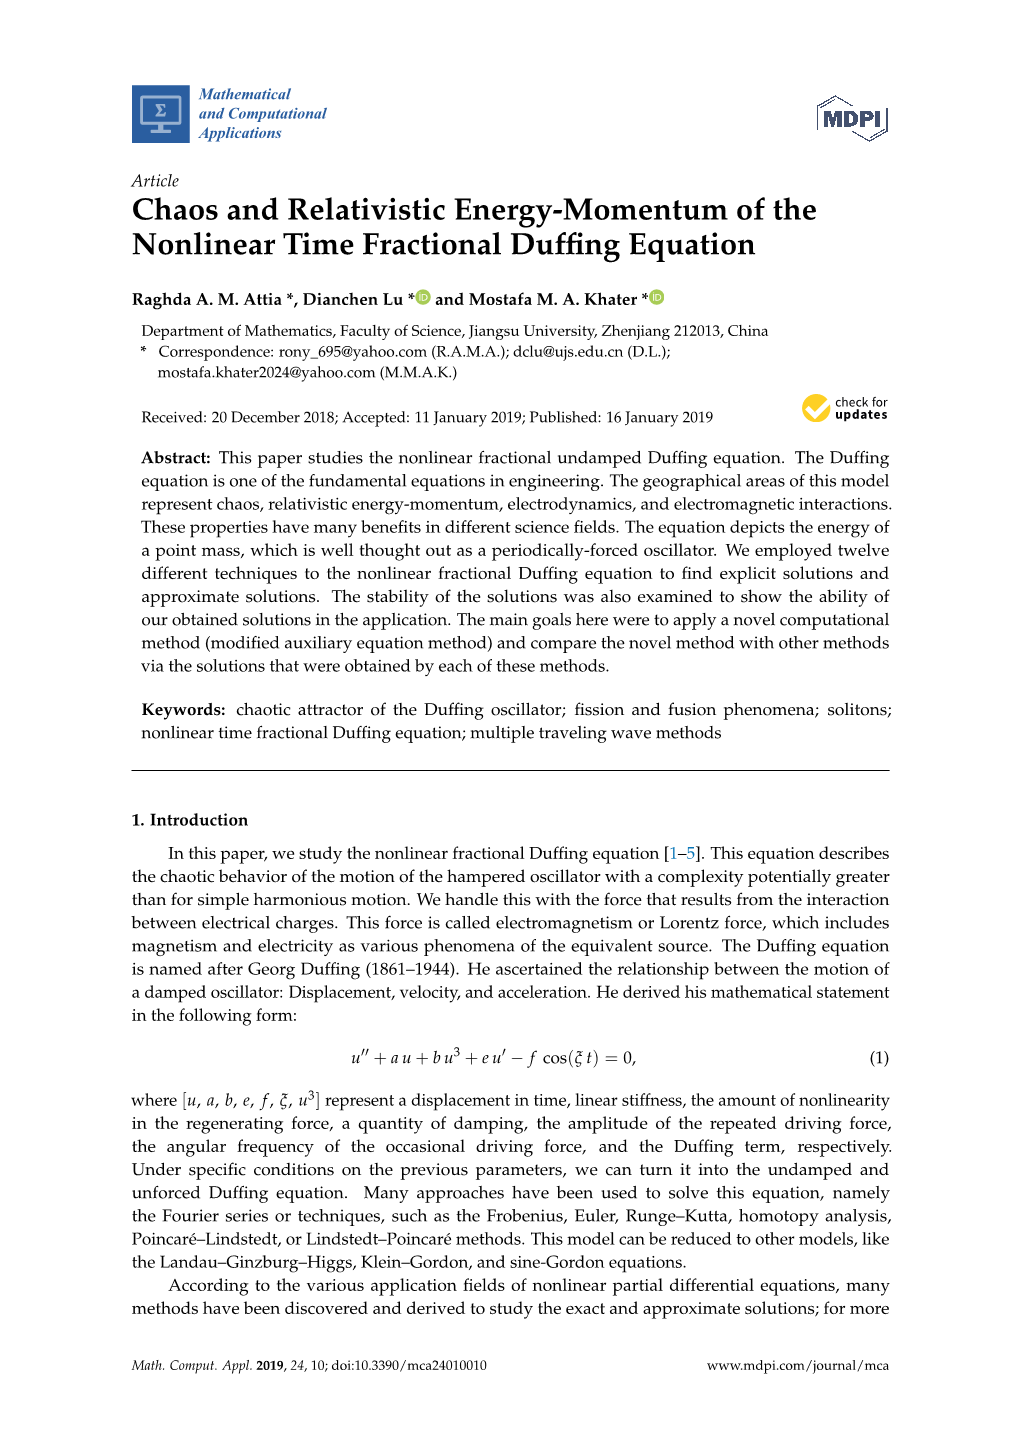 Chaos and Relativistic Energy-Momentum of the Nonlinear Time Fractional Dufﬁng Equation